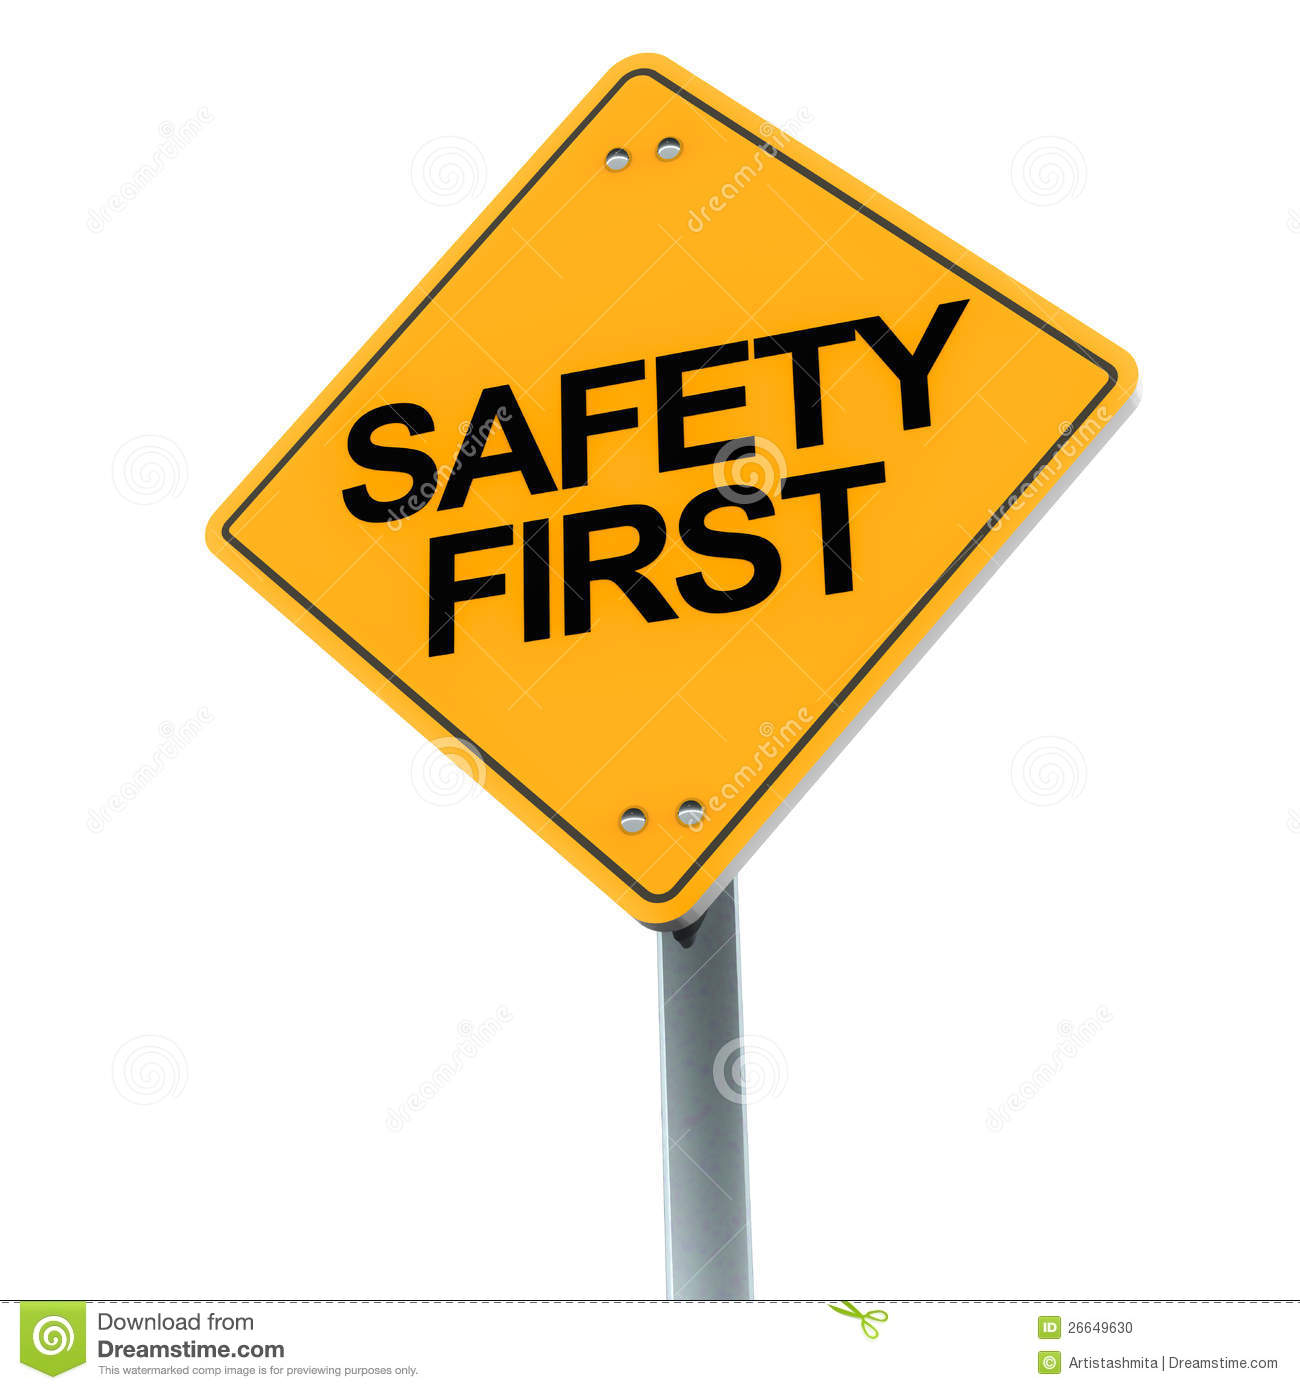 Safety First Road Sign On Clean Background Showing Concern For Safety    